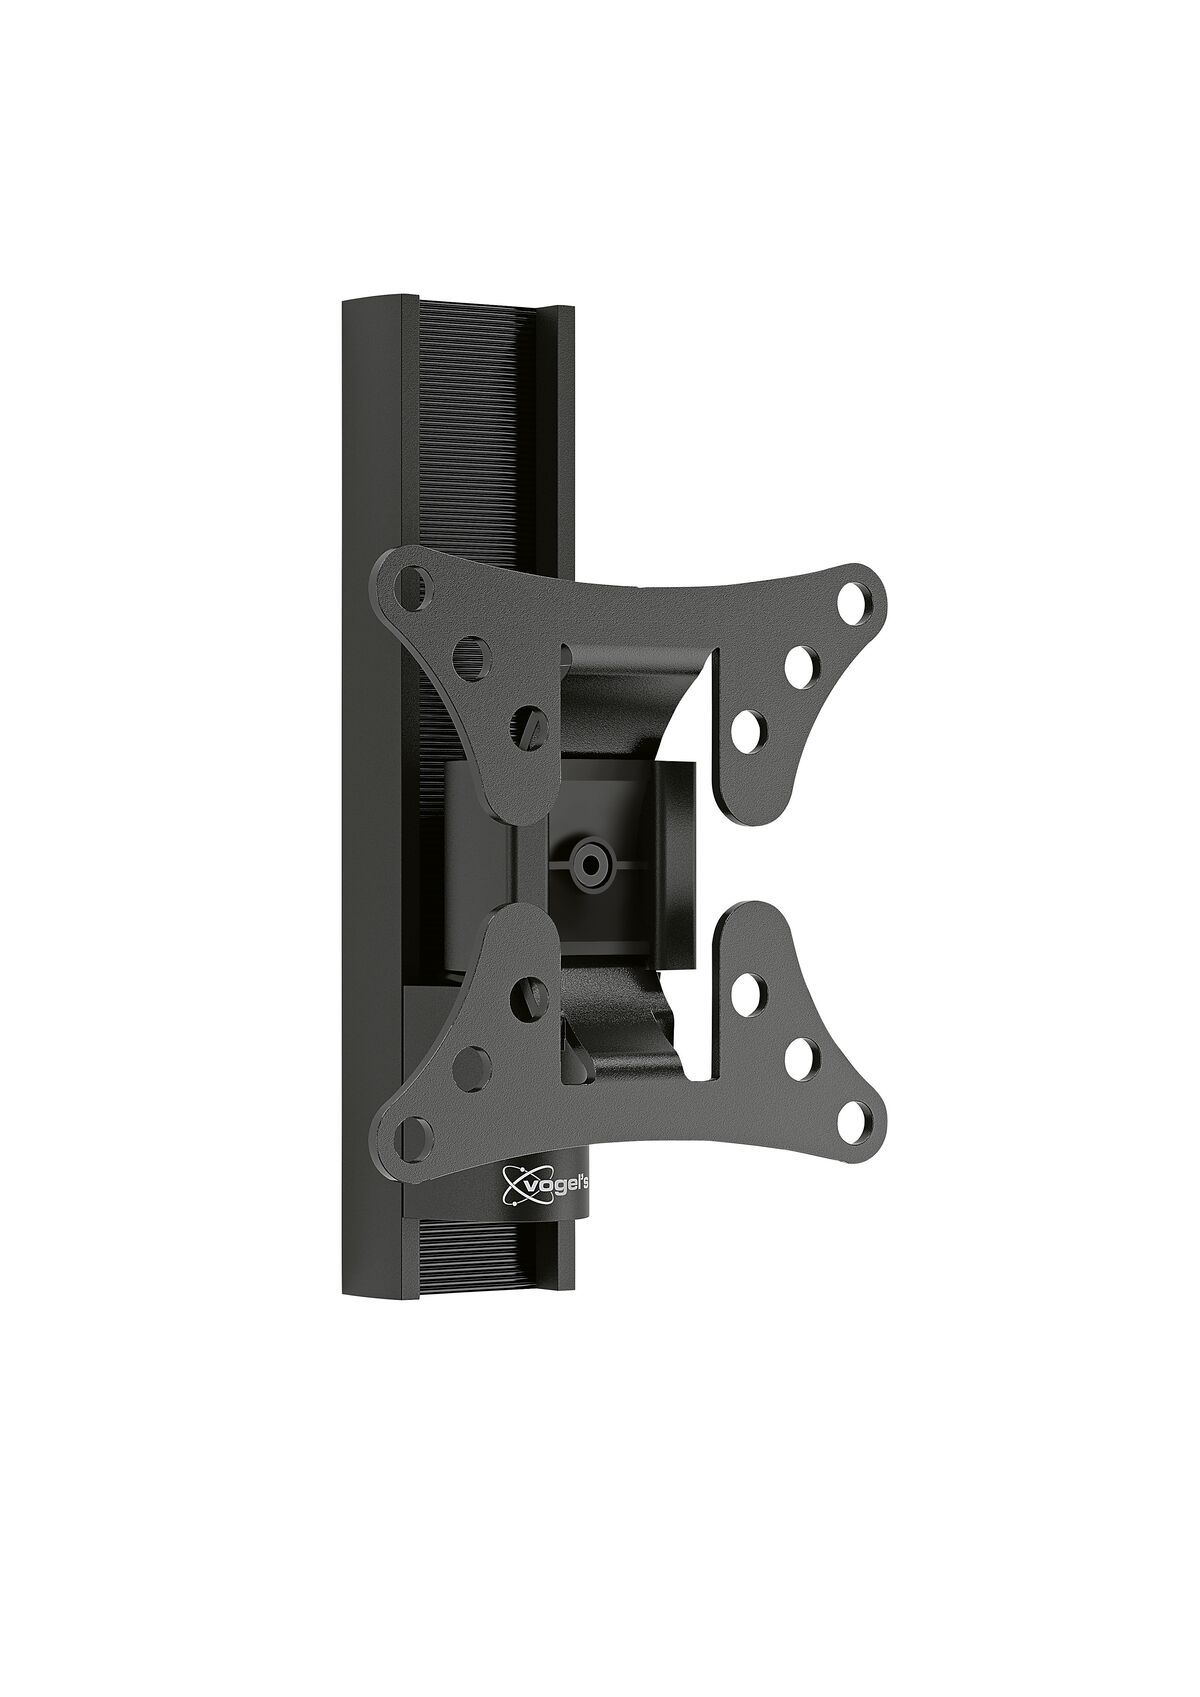 Vogel's WALL 1020 Full-Motion TV Wall Mount - Suitable for 17 up to 26 inch TVs - Limited motion (up to 60°) - Tilt -10°/+10° - Product